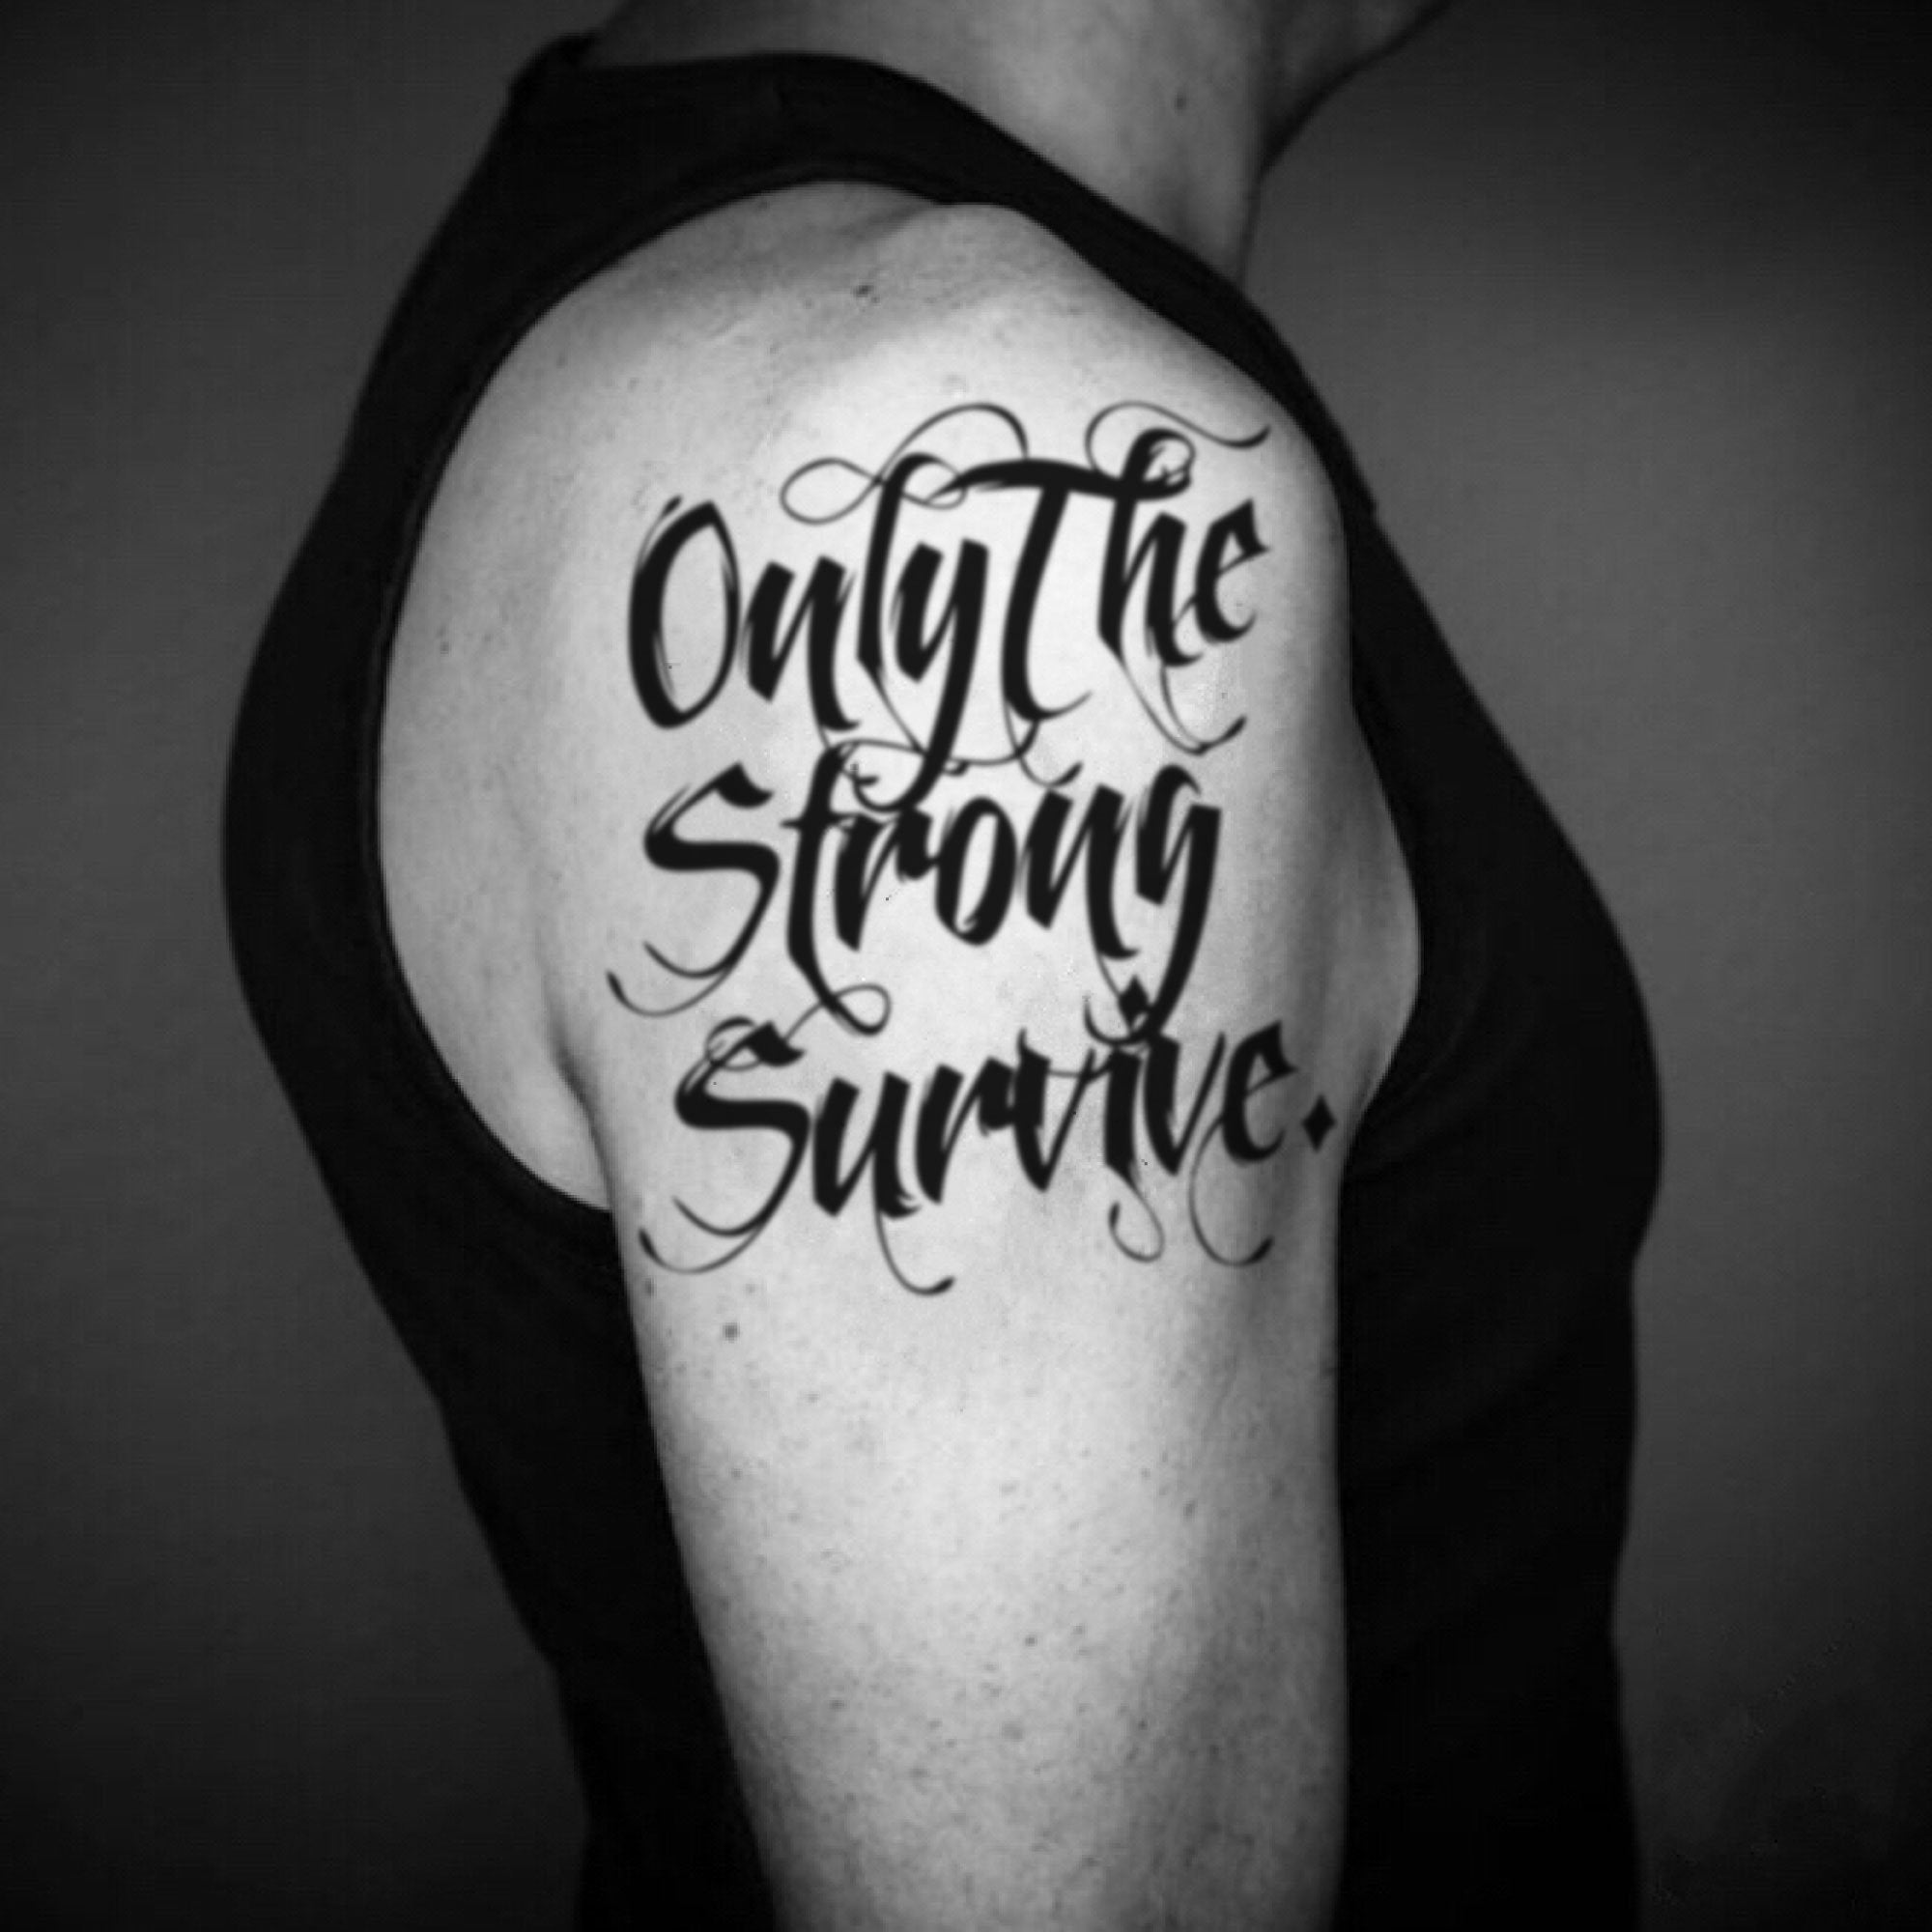 Only The Strong Survive Temporary Tattoo Sticker - OhMyTat